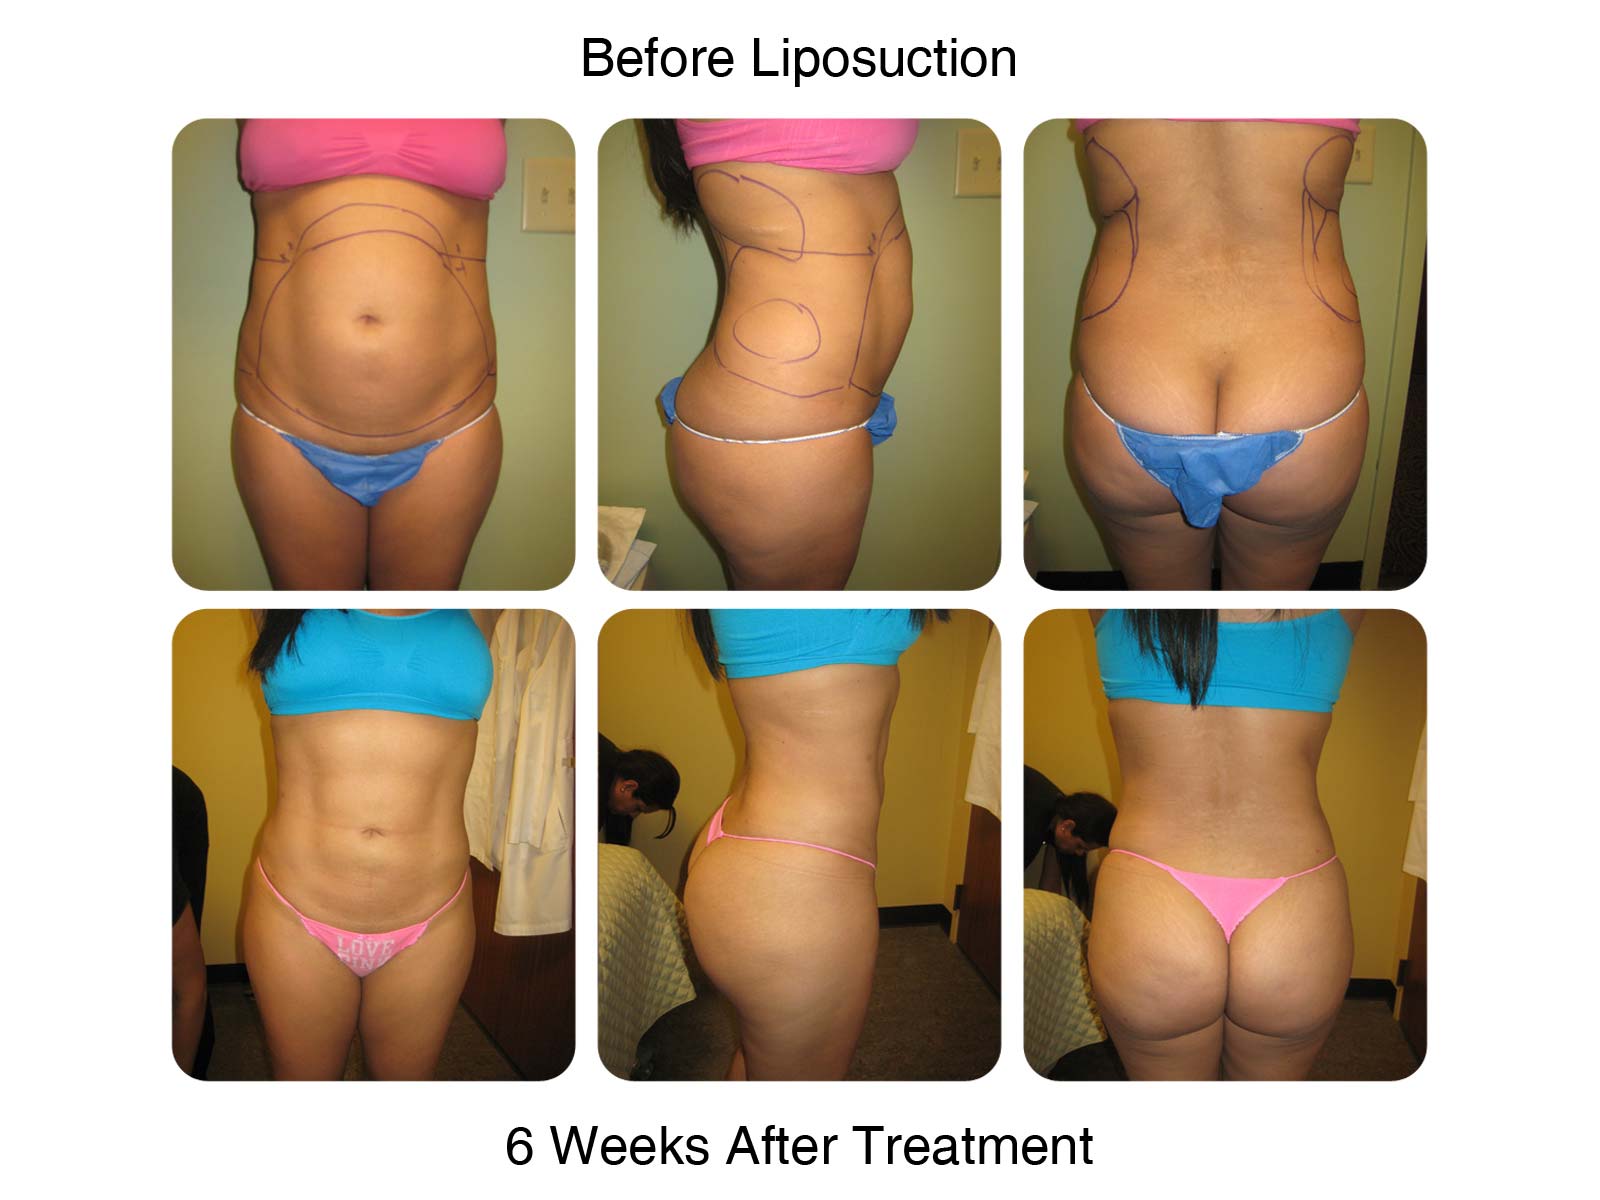 6 Weeks After - Lipo Results